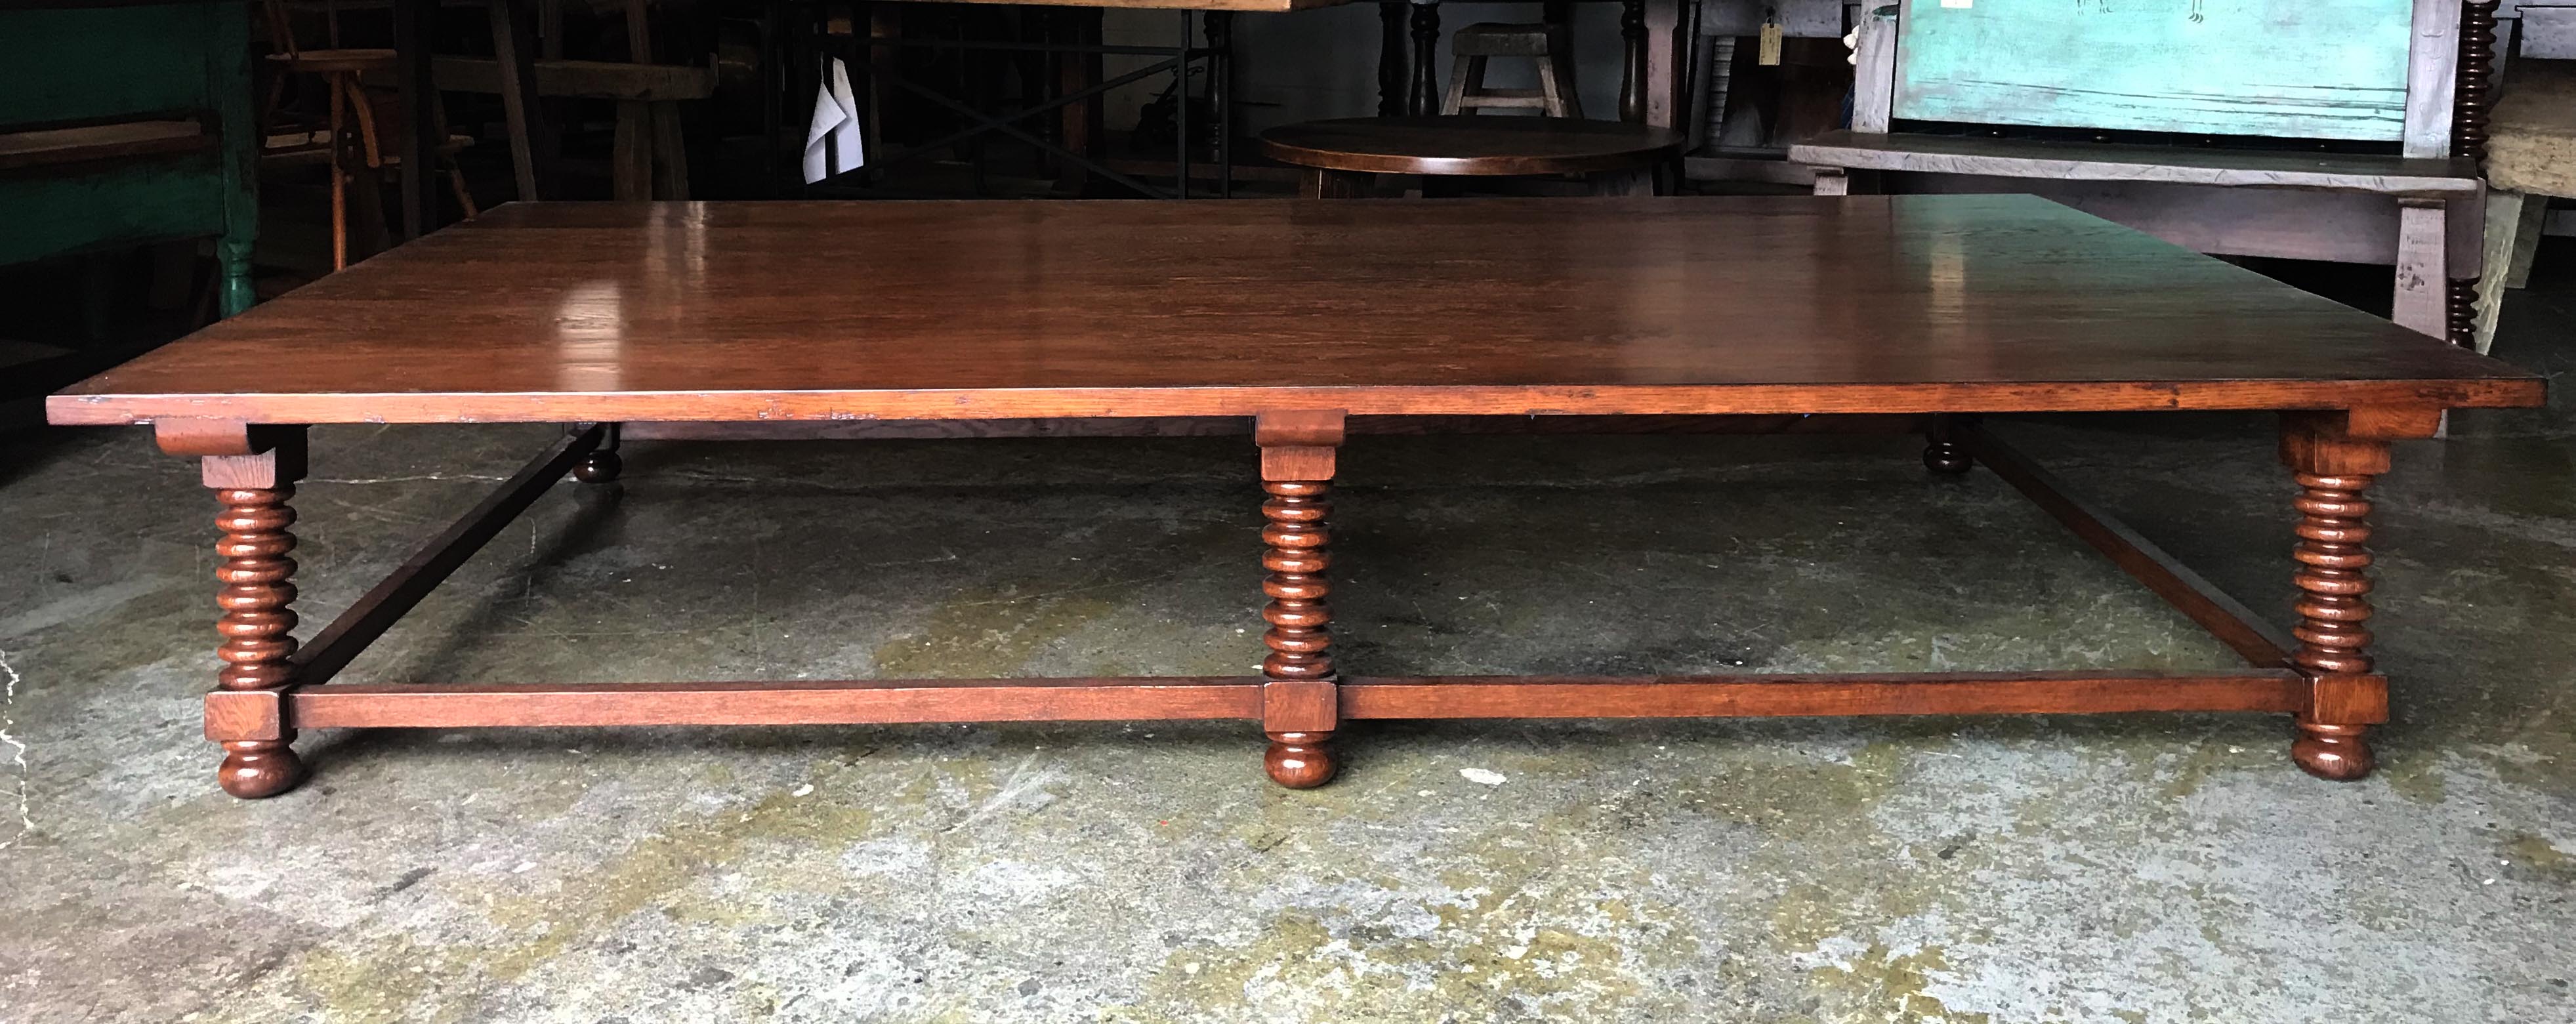 This is a Dos Gallos custom coffee table that can be made in and size and finish. Shown here in Oak with hand planed top and medium to heavy distress in client's custom color. Custom prices are subject to change. Lead time is 14 weeks.
PRICES ARE